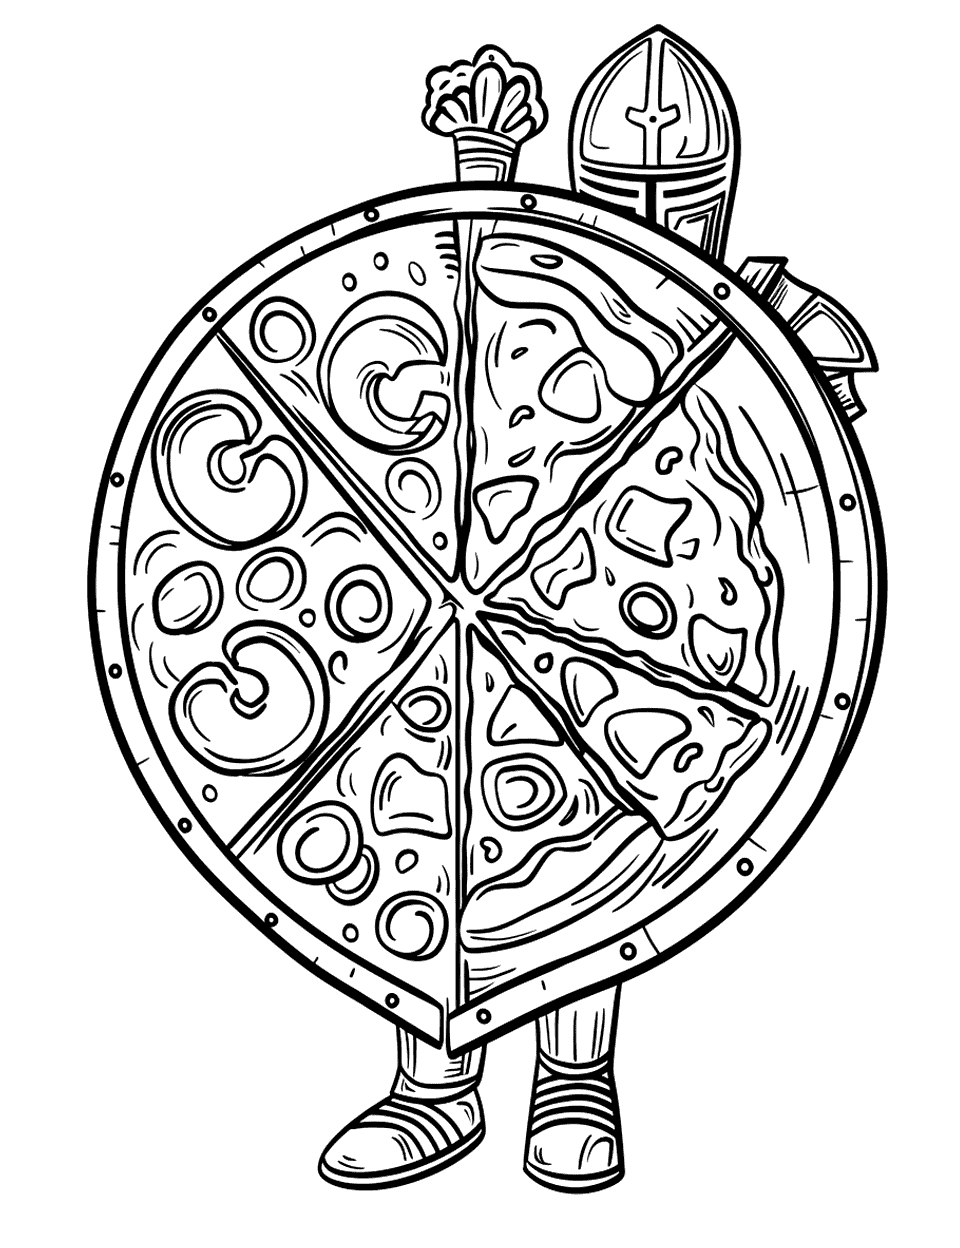 Pizza Knight's Shield Coloring Page - A knight holding a big shield designed like a pizza.